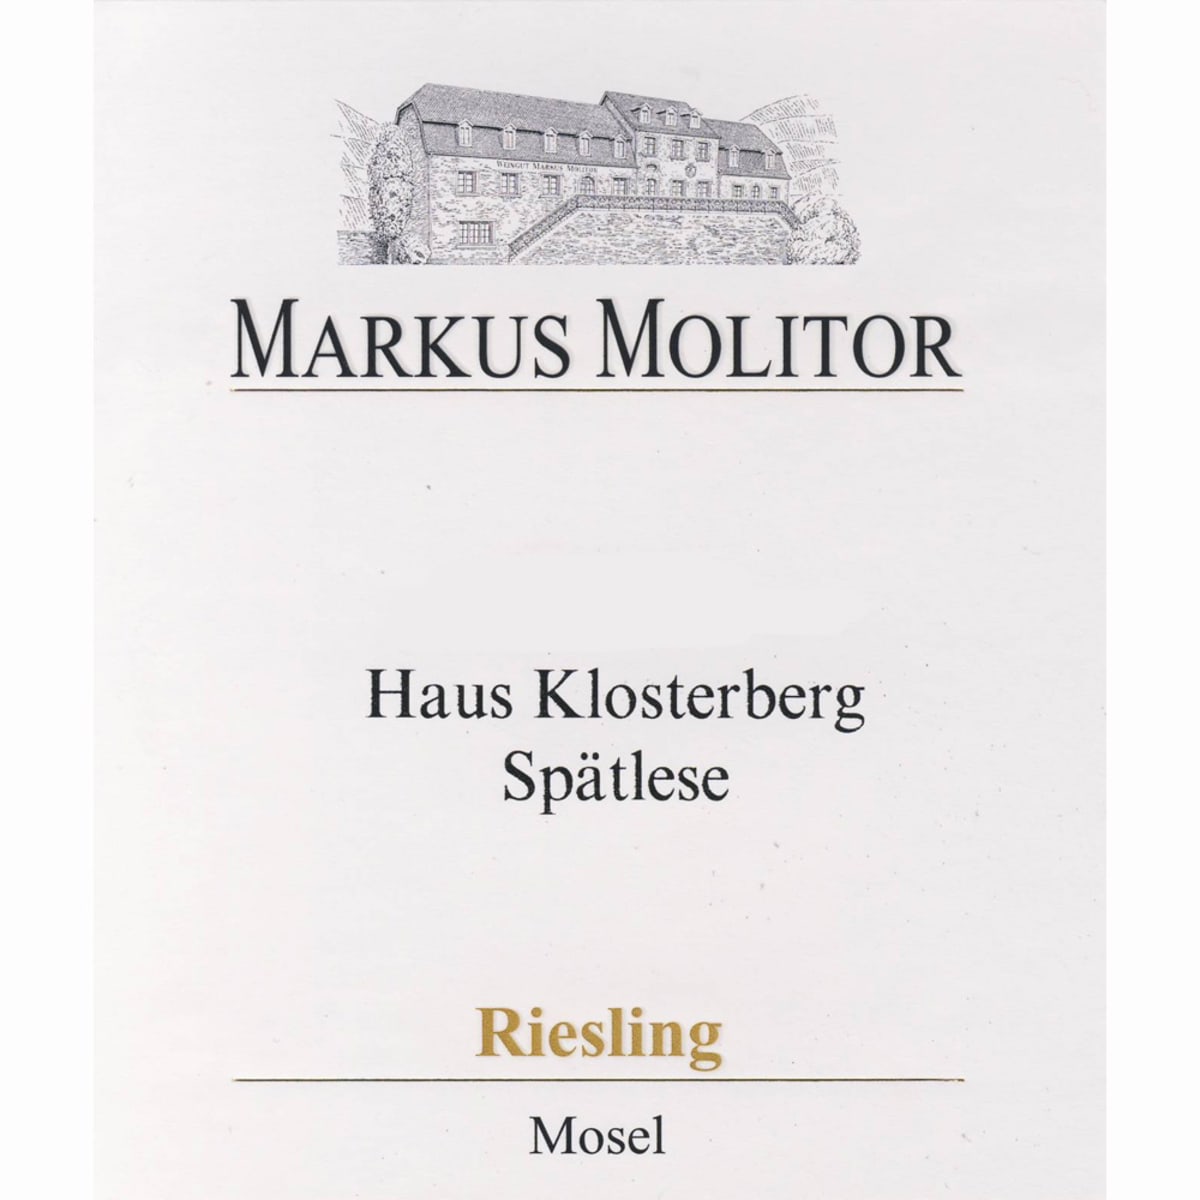 Markus Molitor Haus Klosterberg Riesling Spatlese 2010 Front Label